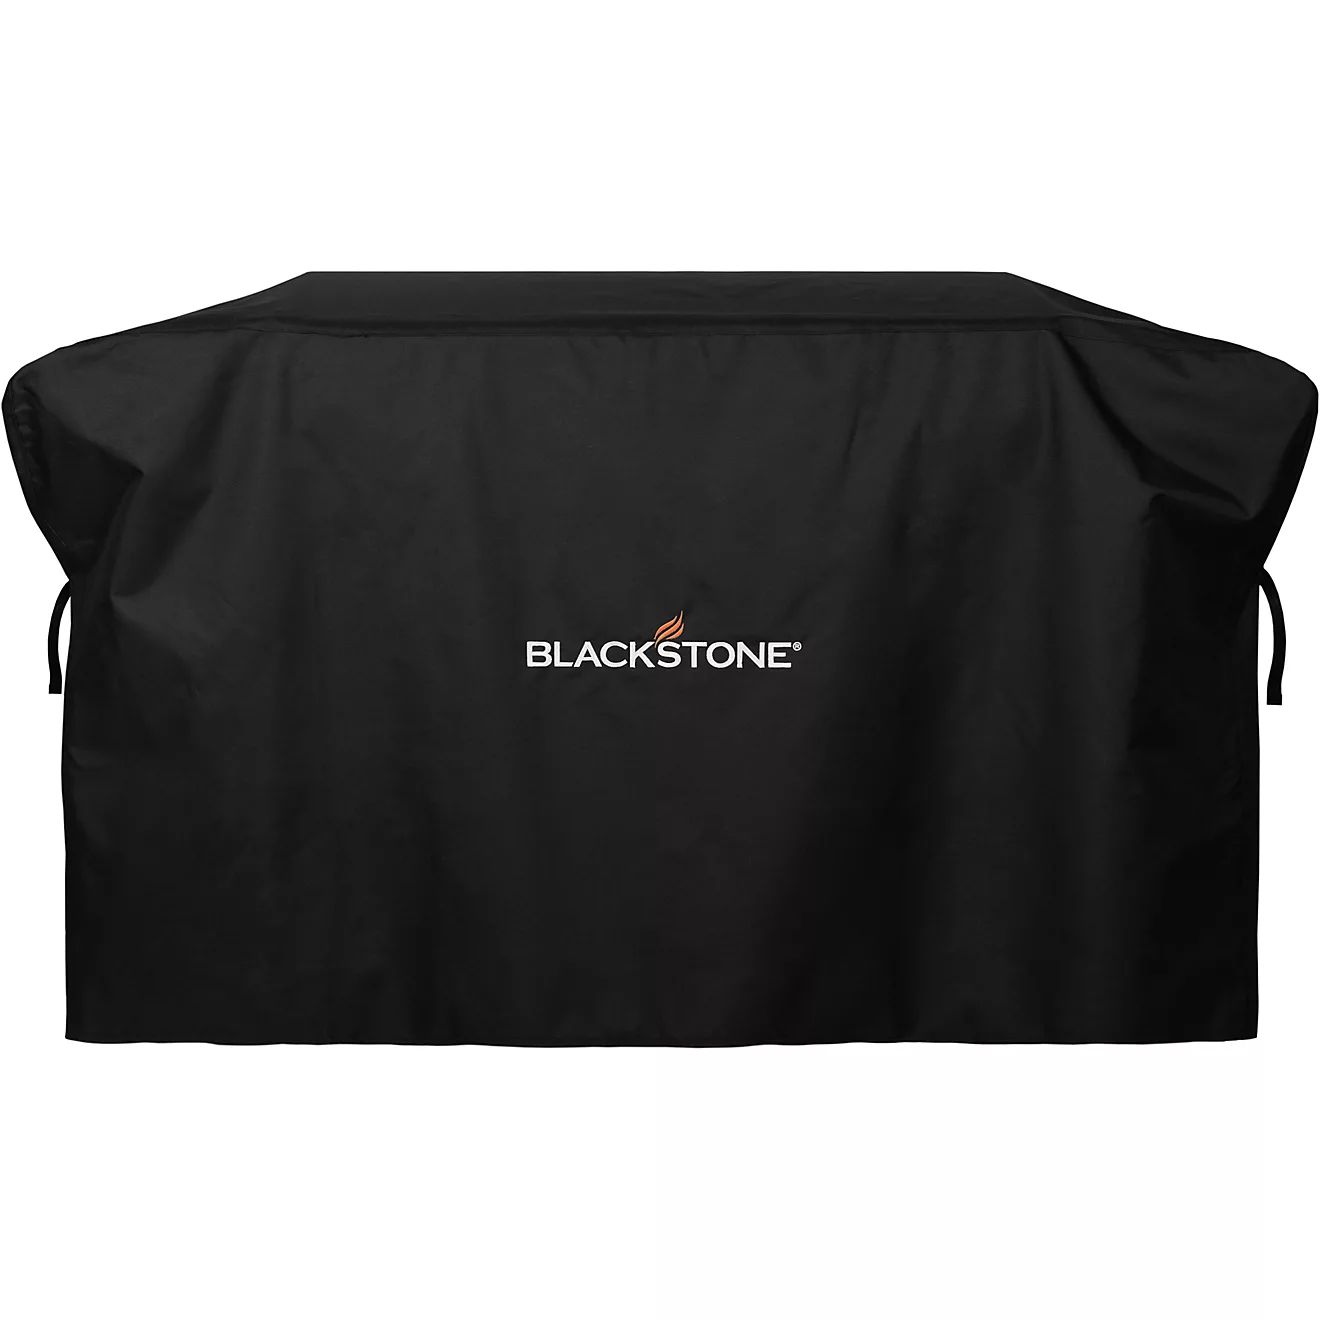 Blackstone 28 in Griddle Hood Cover | Academy Sports + Outdoors